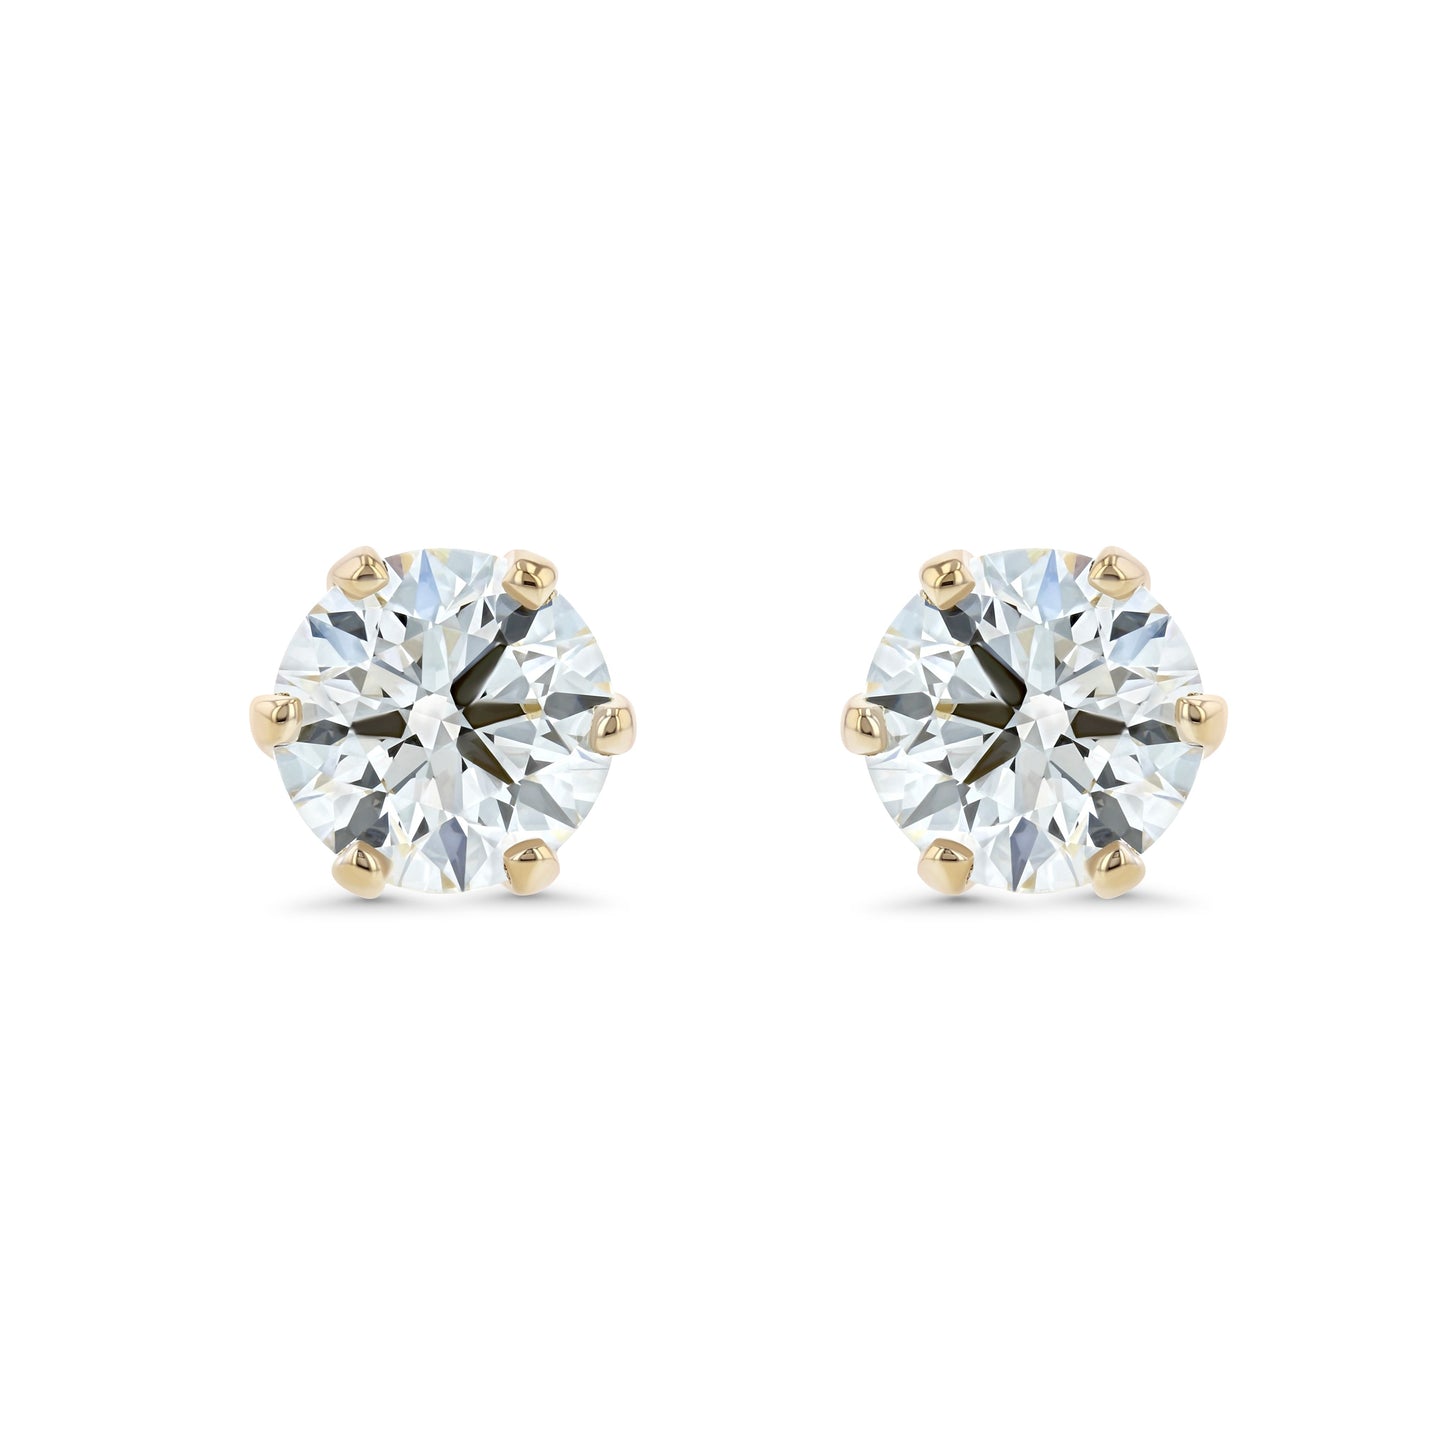 14k Yellow Gold 6-prong Round Diamond Stud Earrings 1/2ctw (4.1mm Ea), G-h Color, I1 Clarity